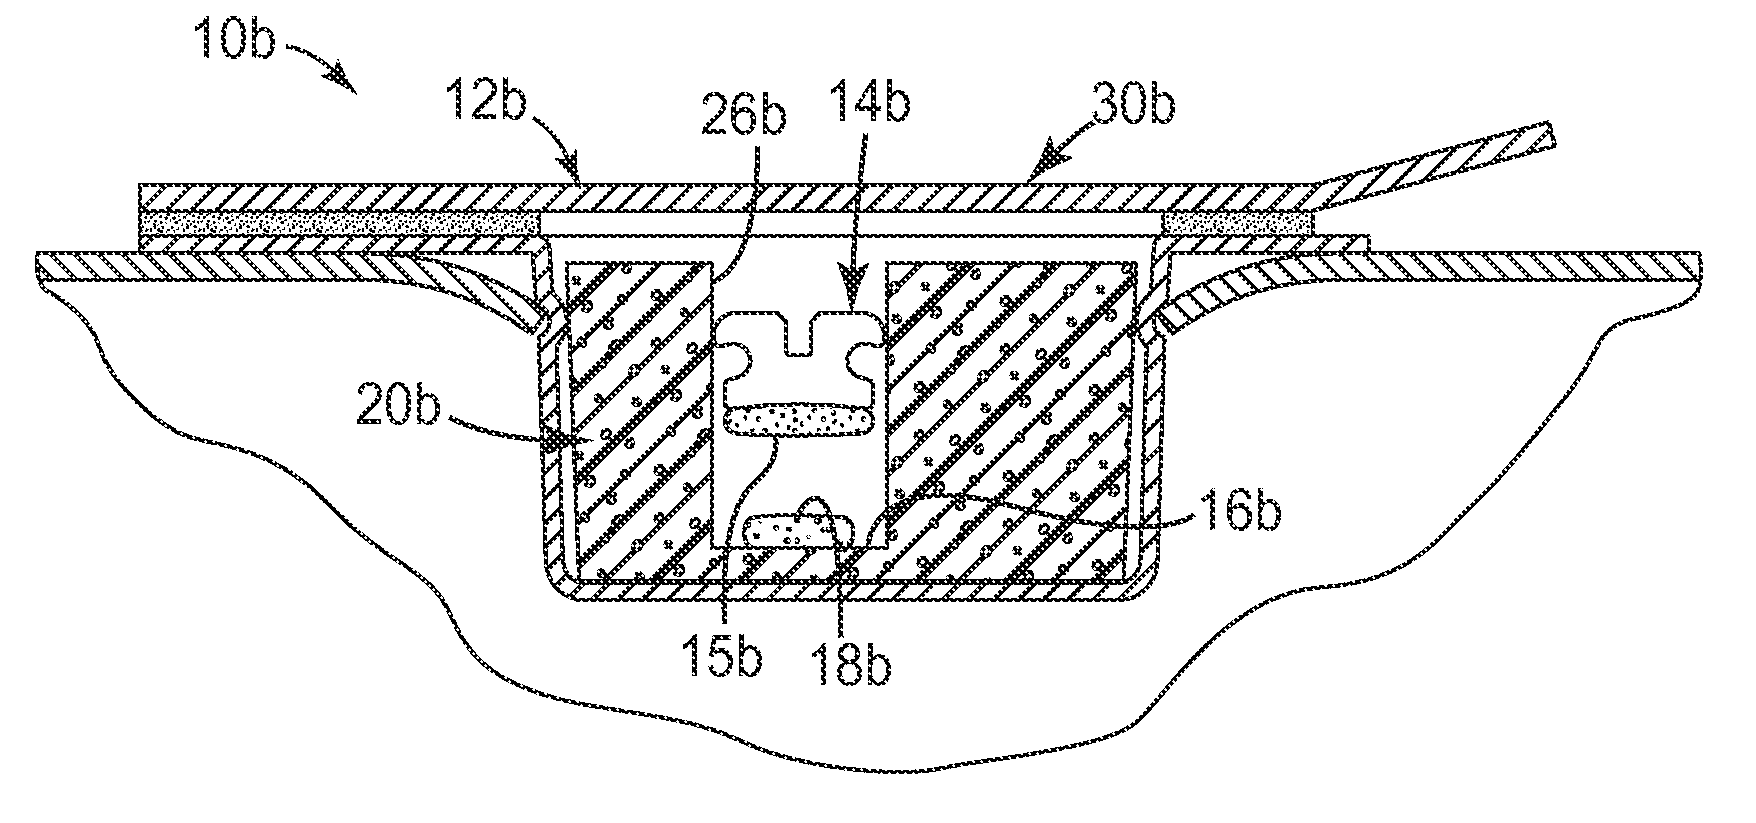 Packaged orthodontic appliance and adhesive material